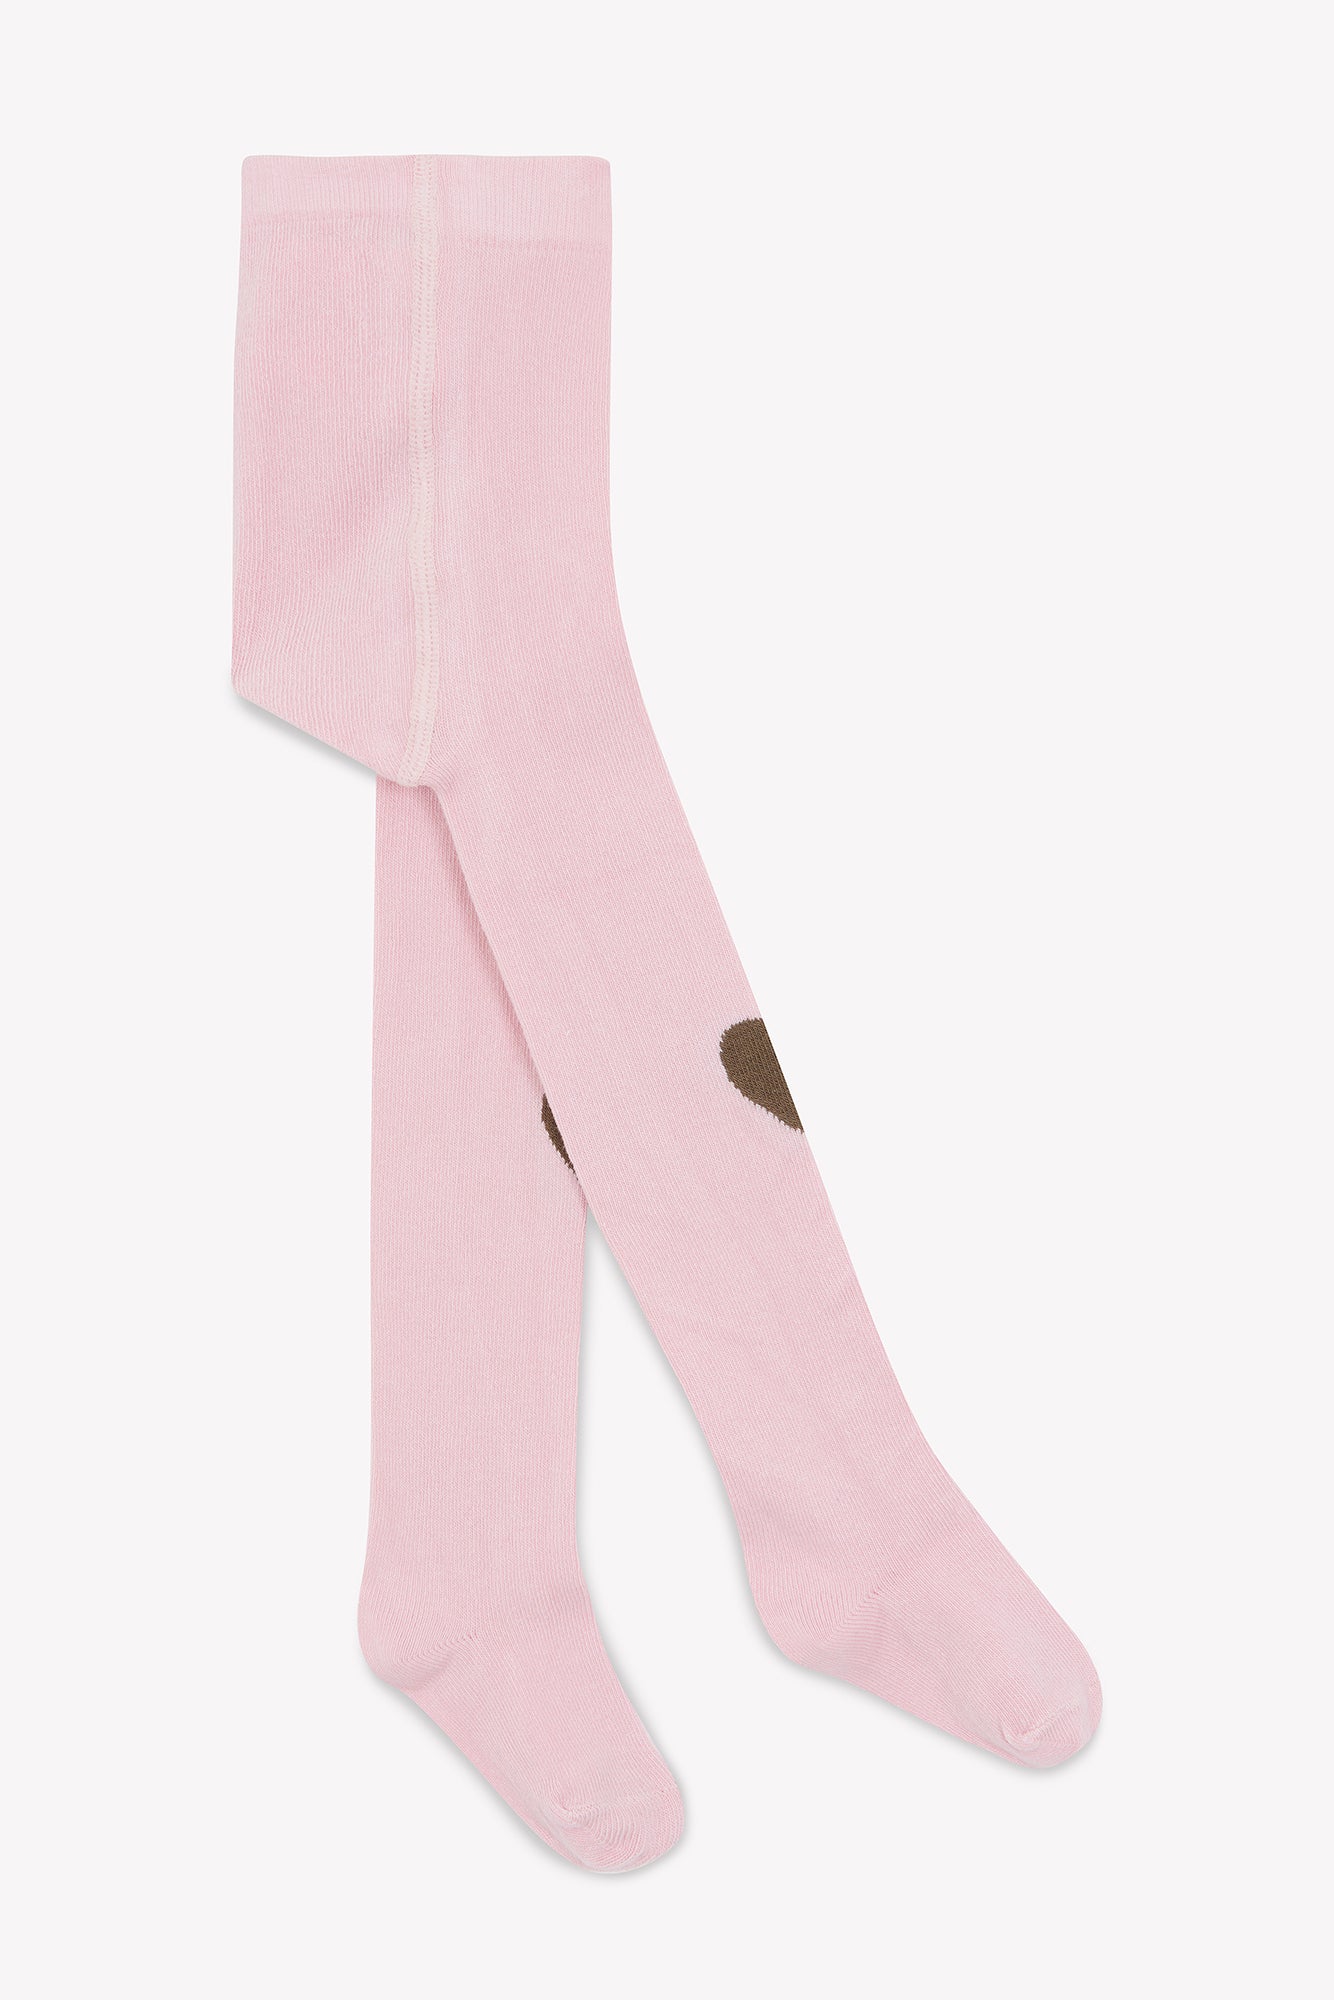 Tights - Pink Baby